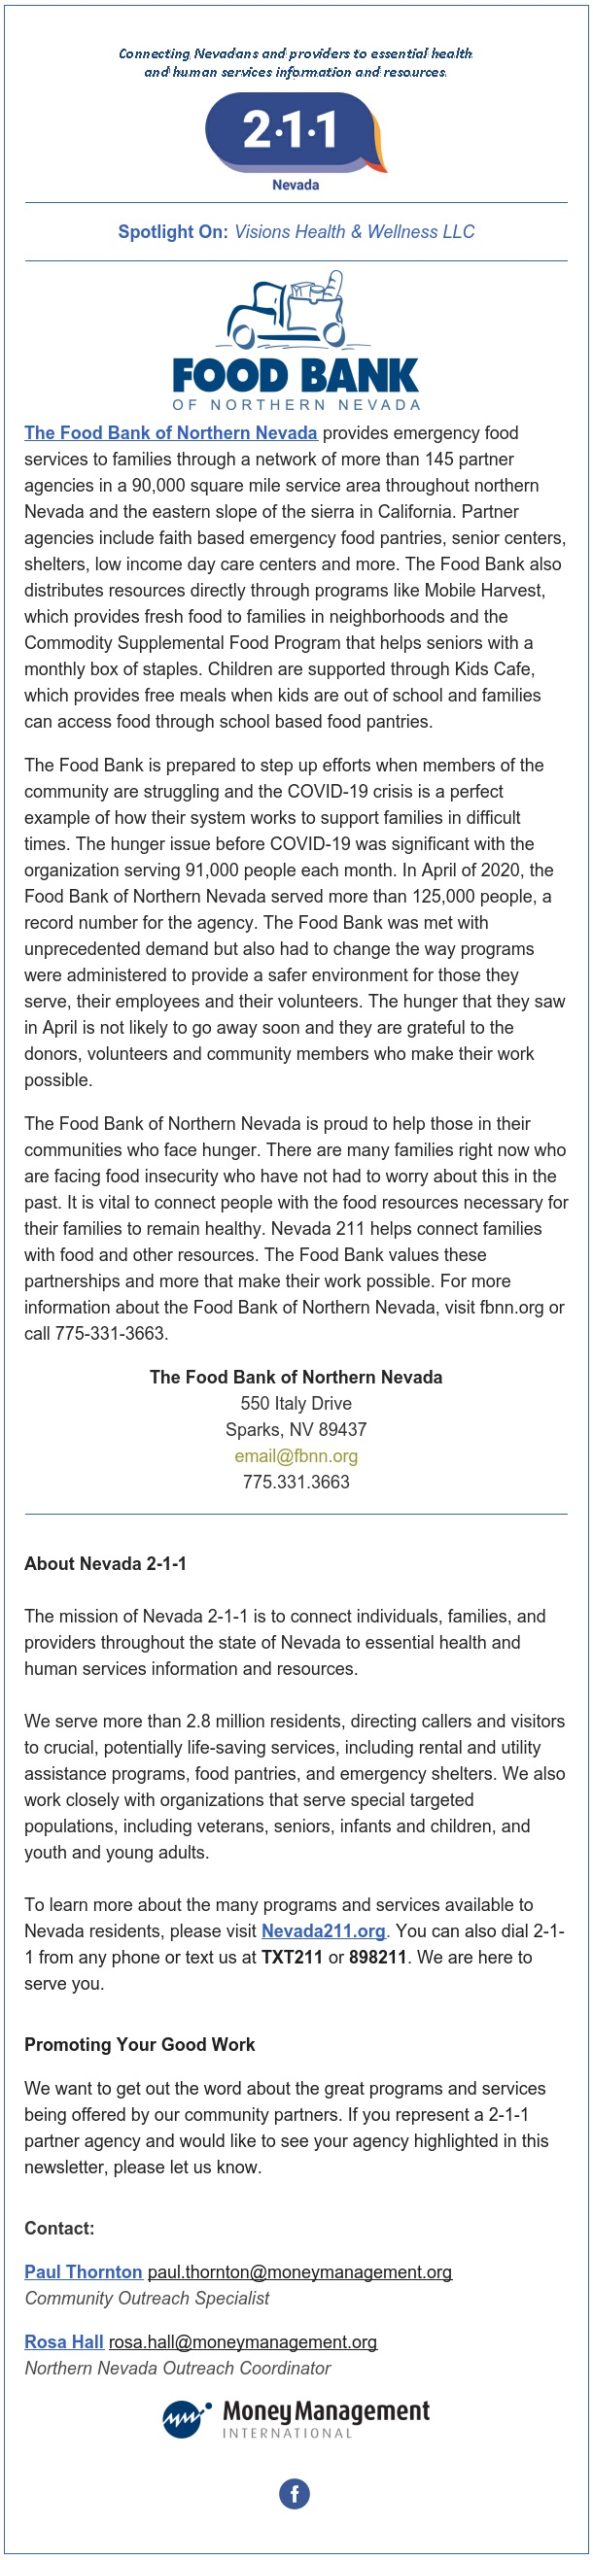 Nevada 211 Sept 2020 Newsletter Honoring the Food Bank of Northern Nevada